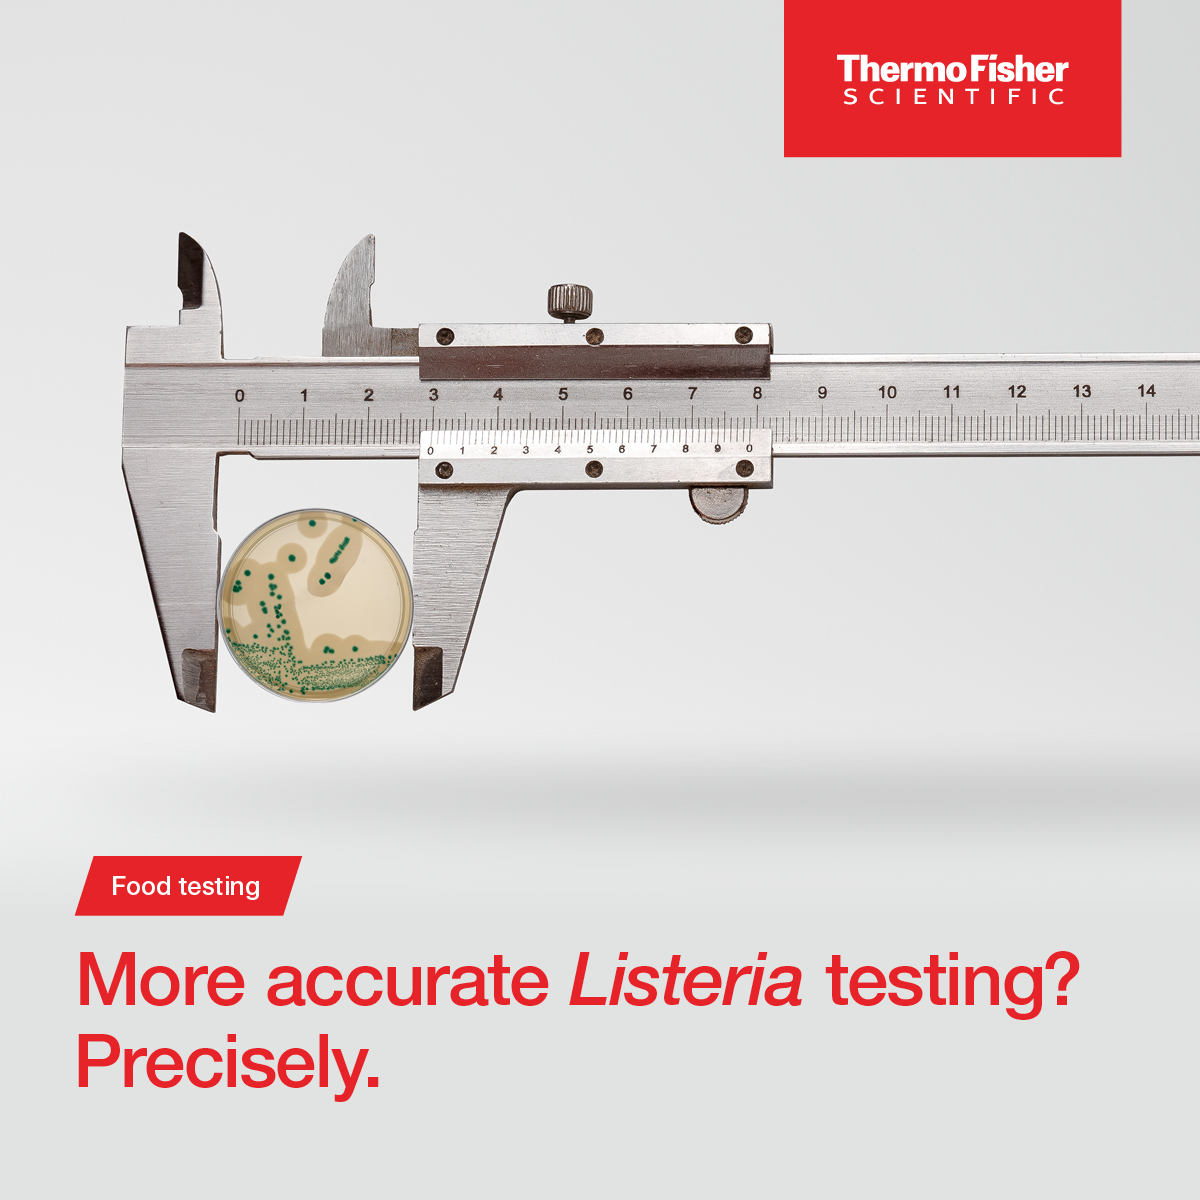 Be ‘precise’ in your #Listeria testing with the new Thermo Scientific™ Listeria Precis™ Methods: next-generation culture media technology for the detection and enumeration of Listeria species and L. monocytogenes in food and environmental samples: ow.ly/QTYp50M1PPz